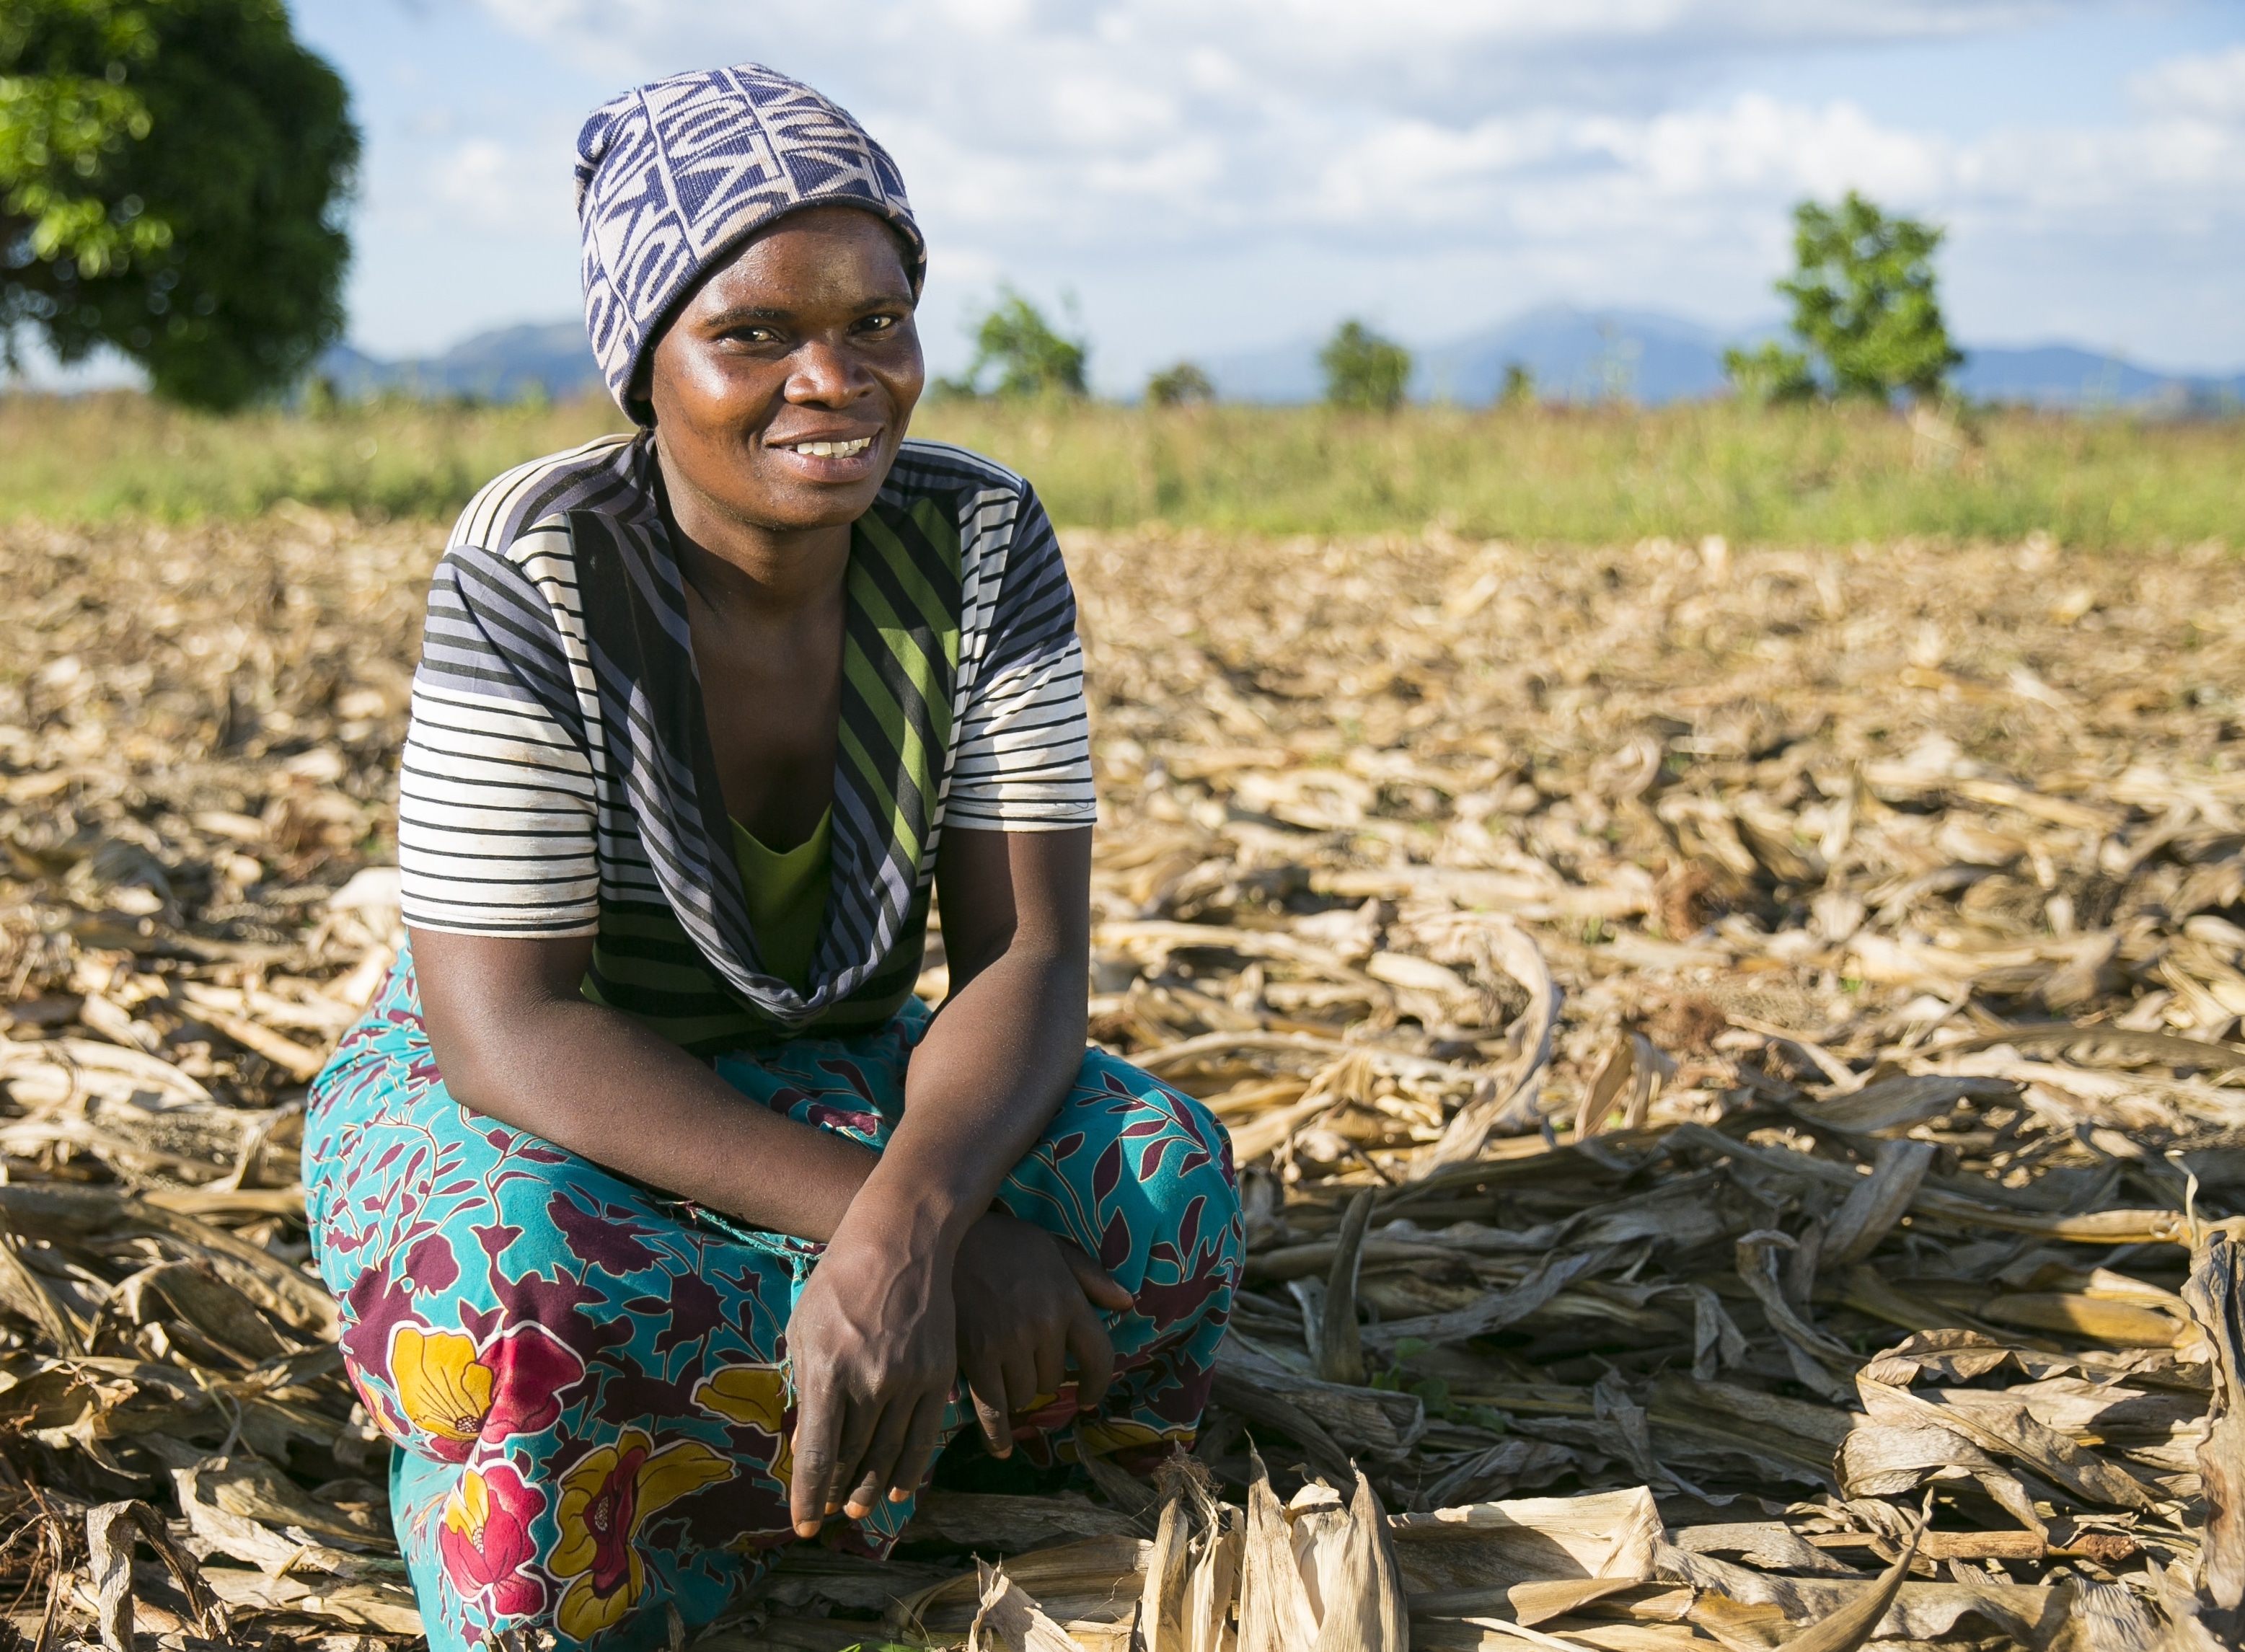 Malawian farmer Agnes Jack with her field, which has been treated using Climate Smart Agriculture techniques